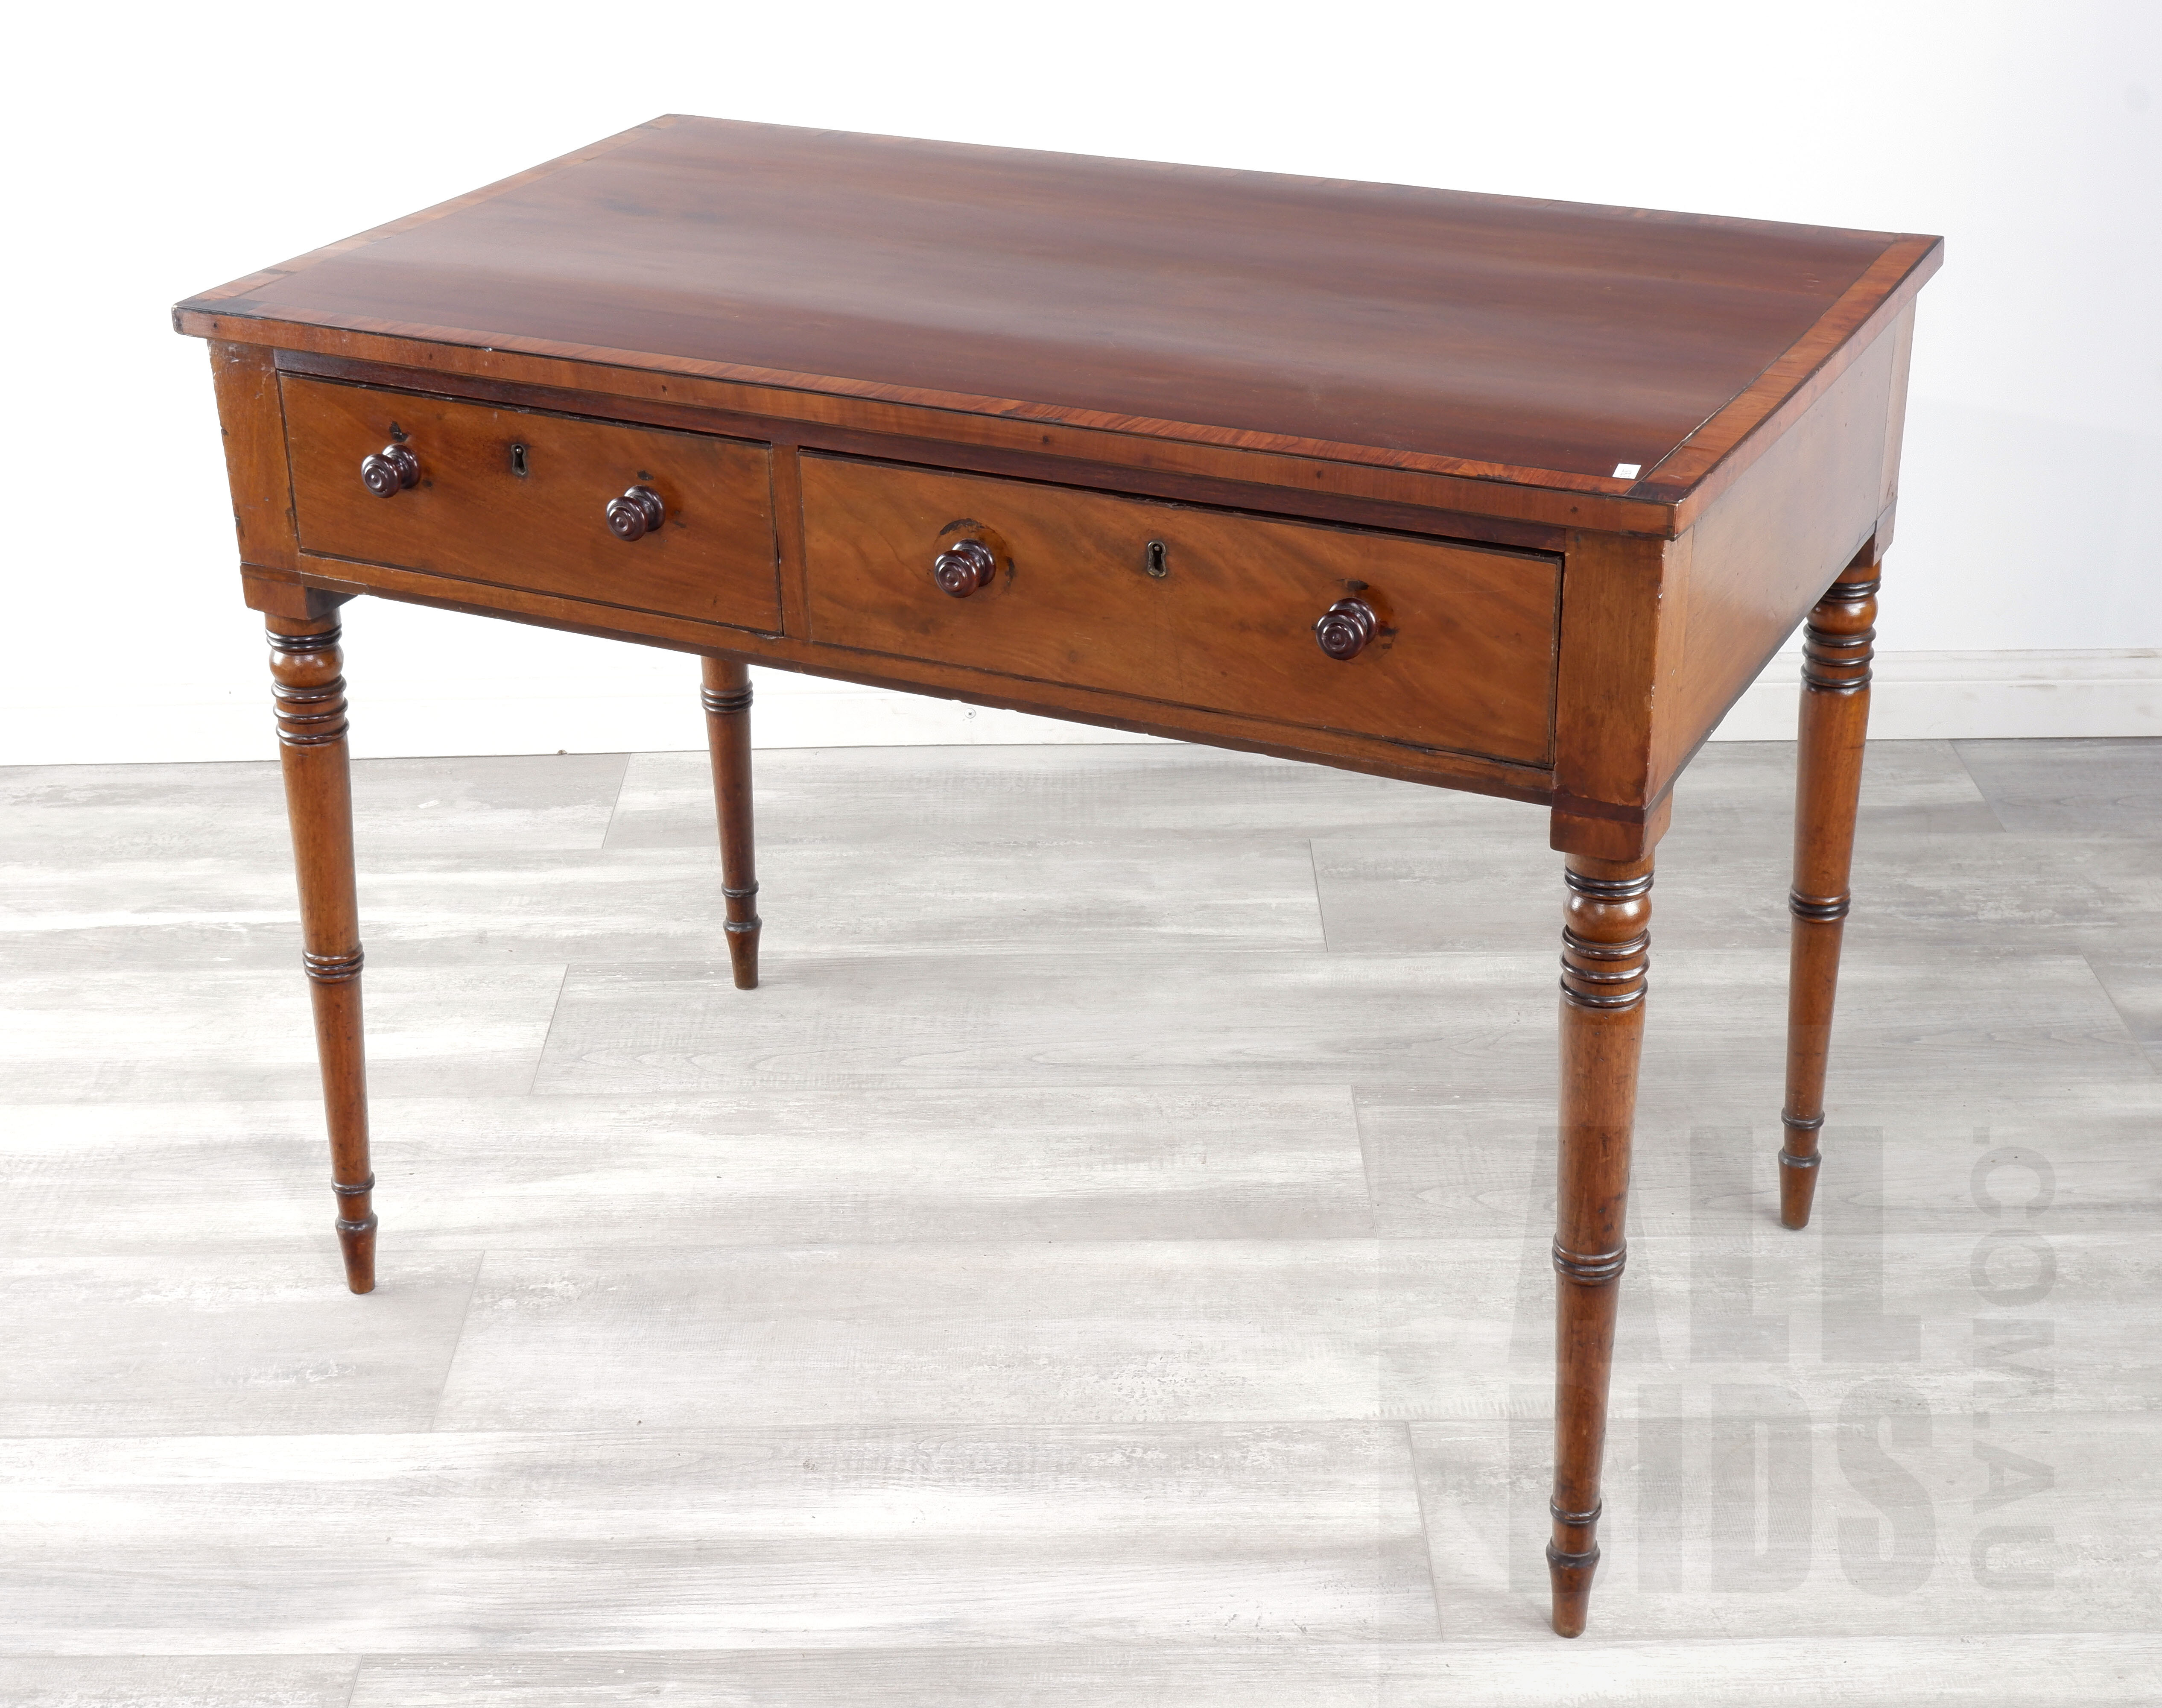 'Early Victorian Mahogany and Ebony Strung Two Drawer Writing Table, Mid 19th Century'